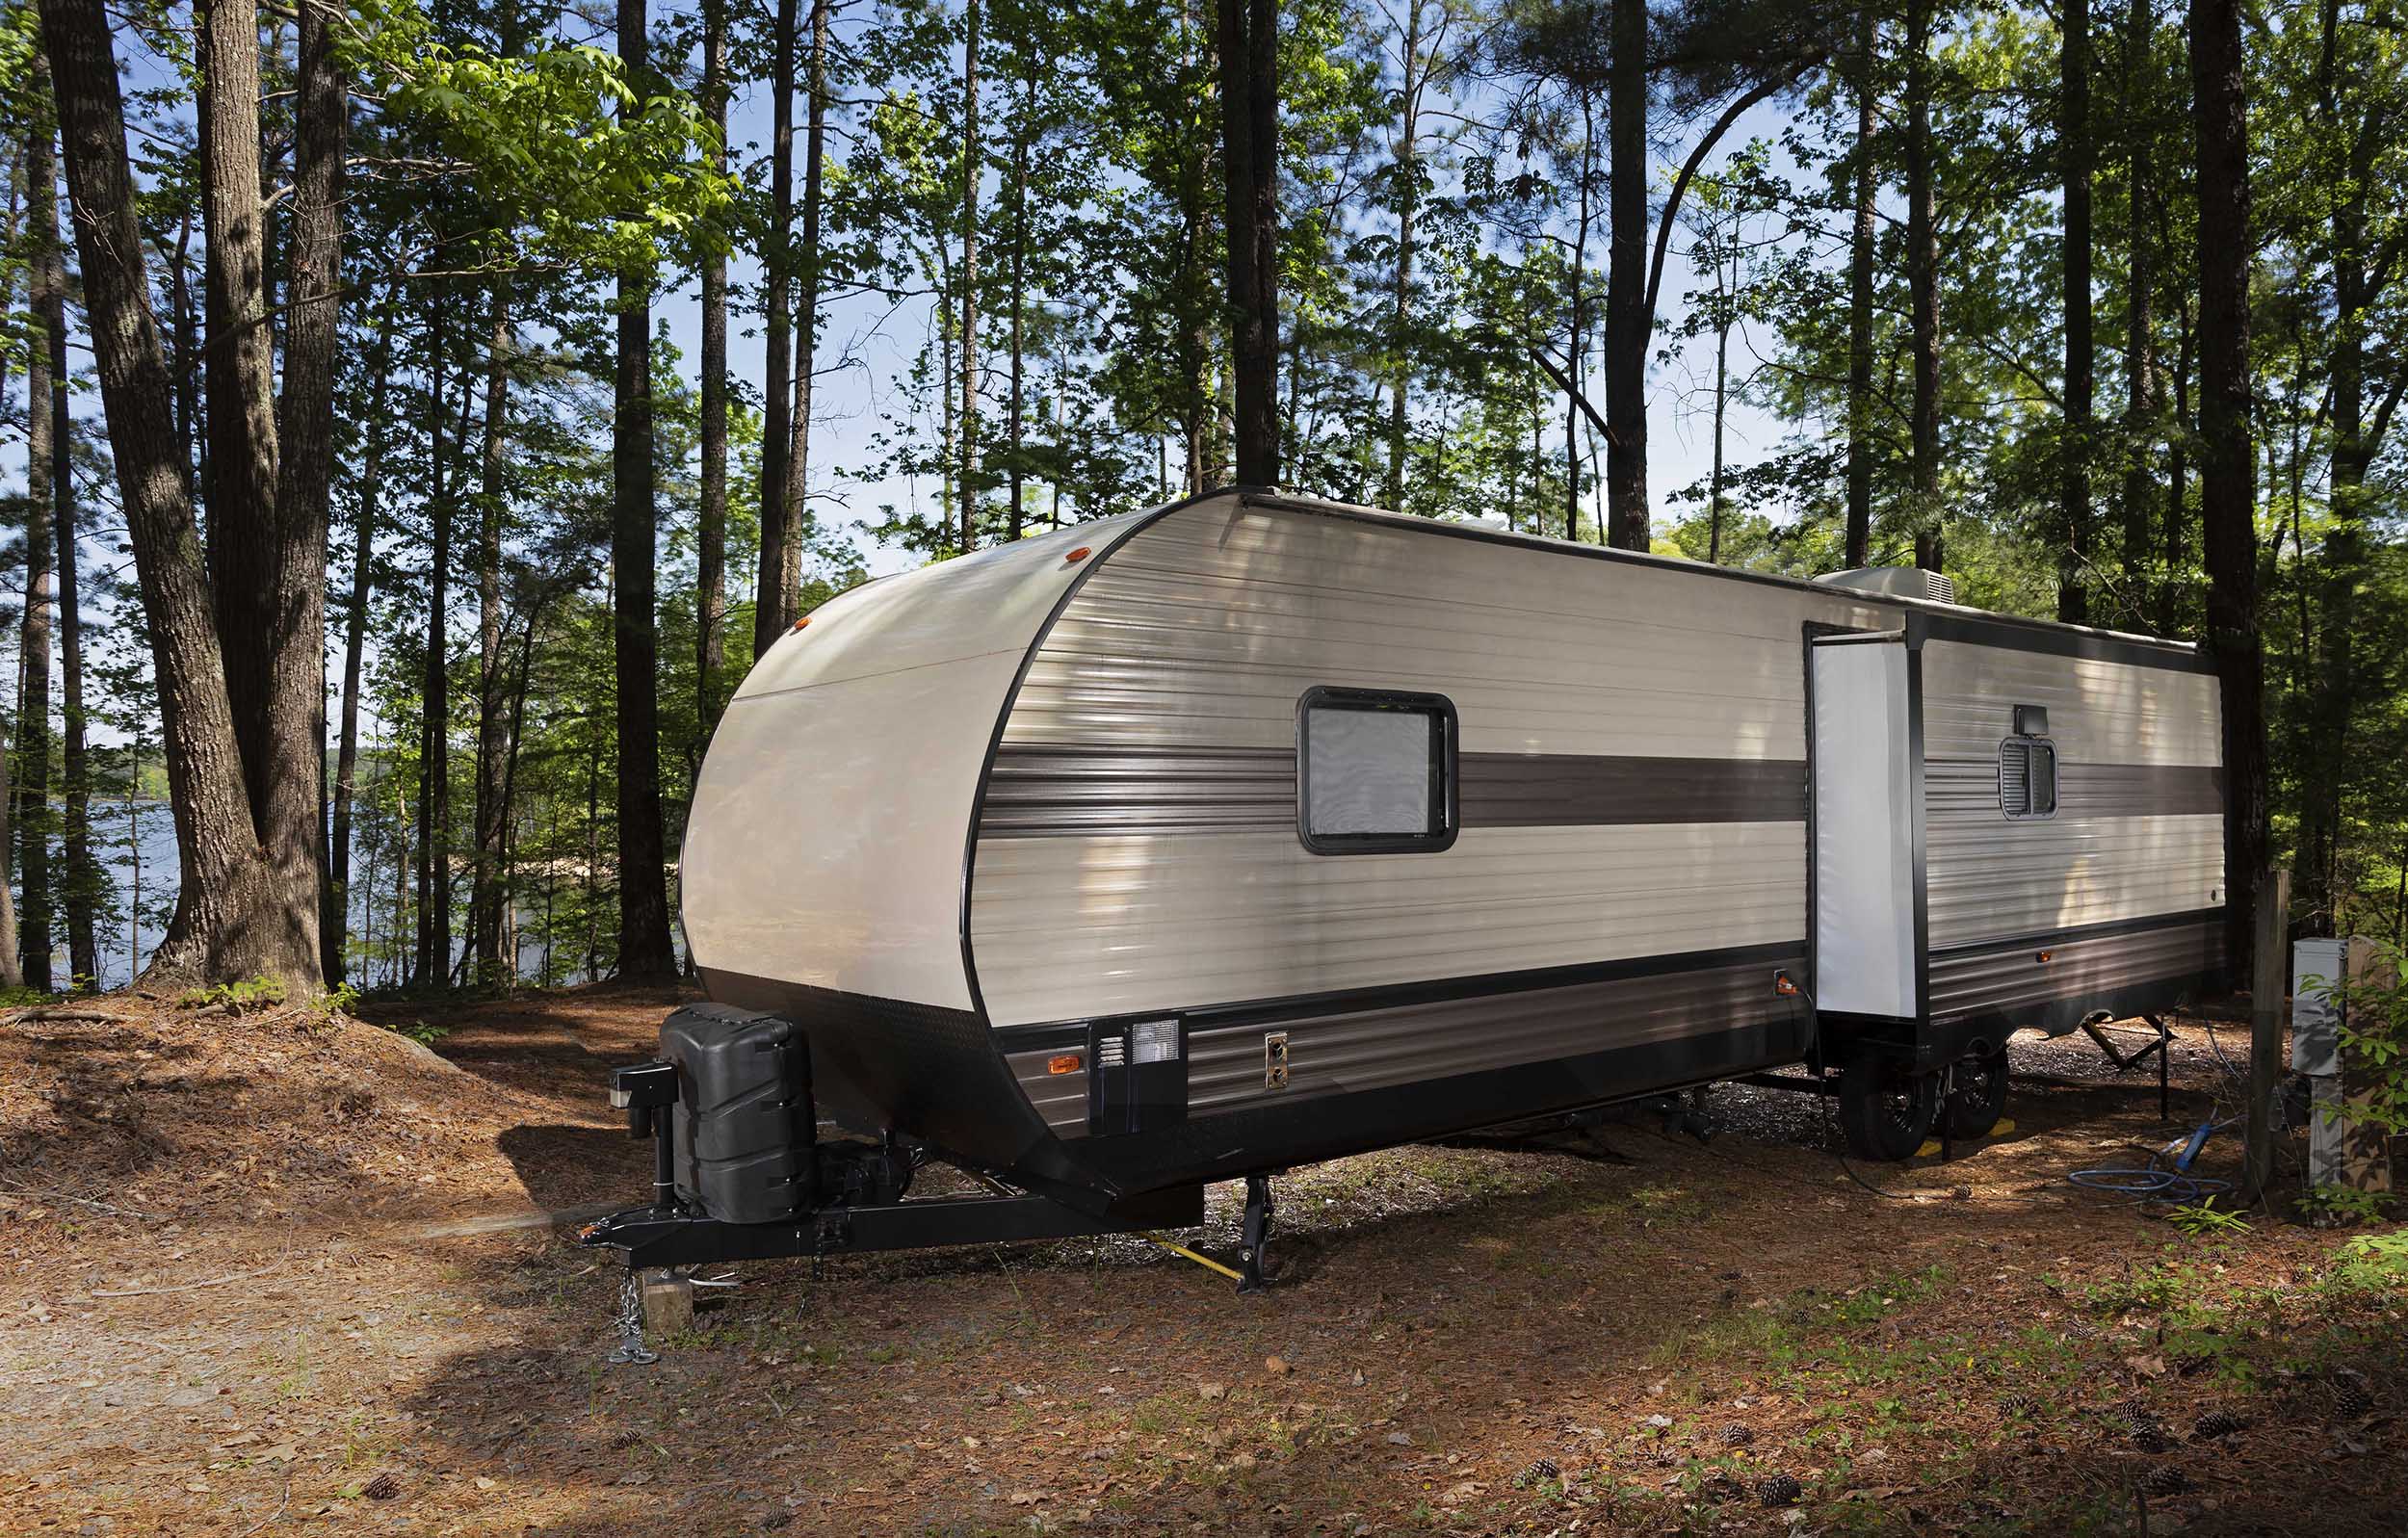 A travel trailer parked in a wooded campsite